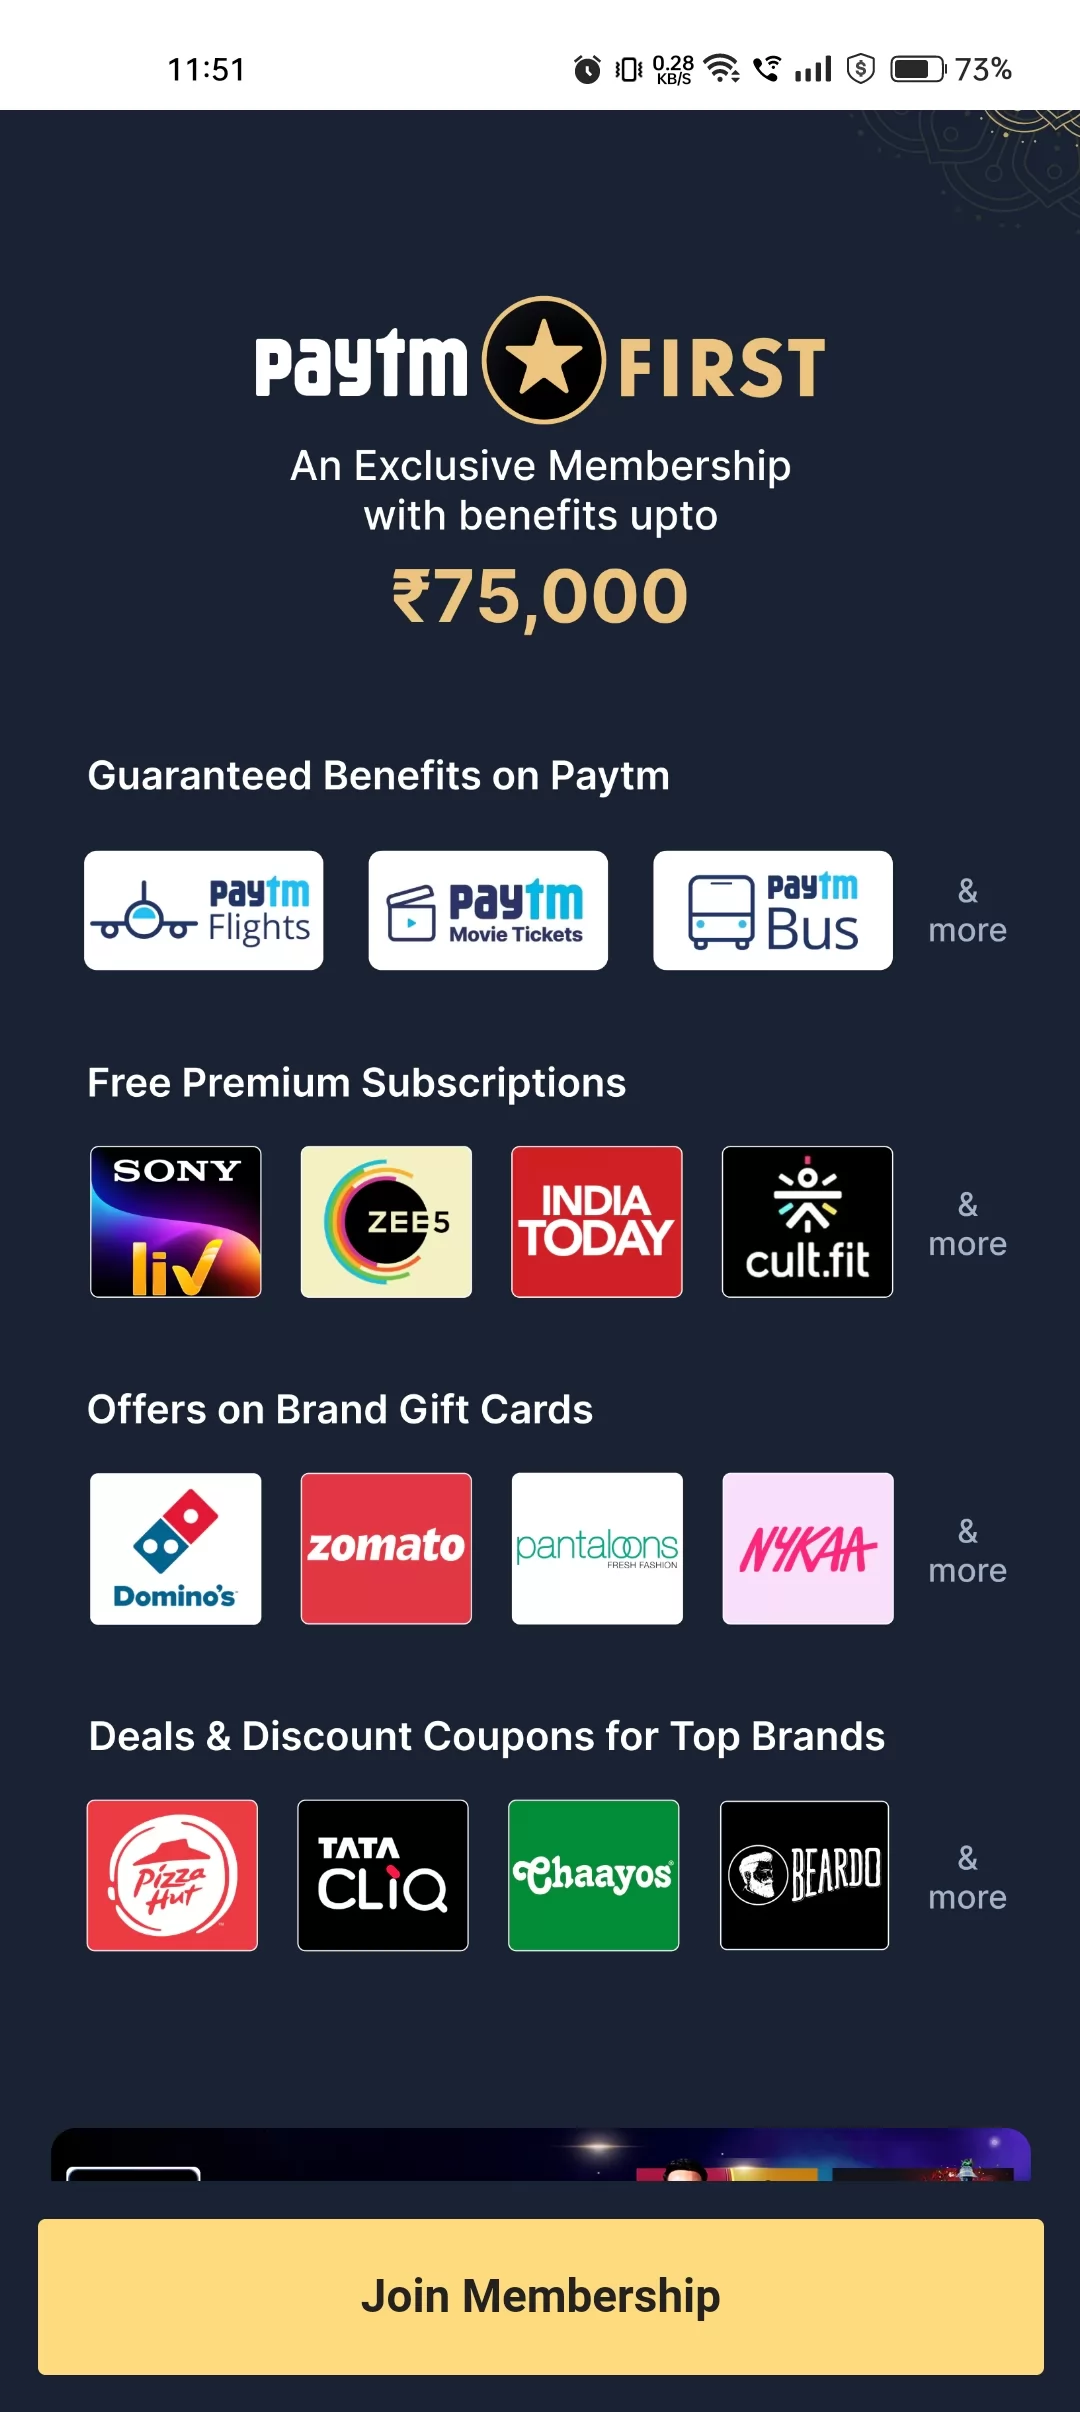 how to watch SonyLiv for free - Through Paytm First